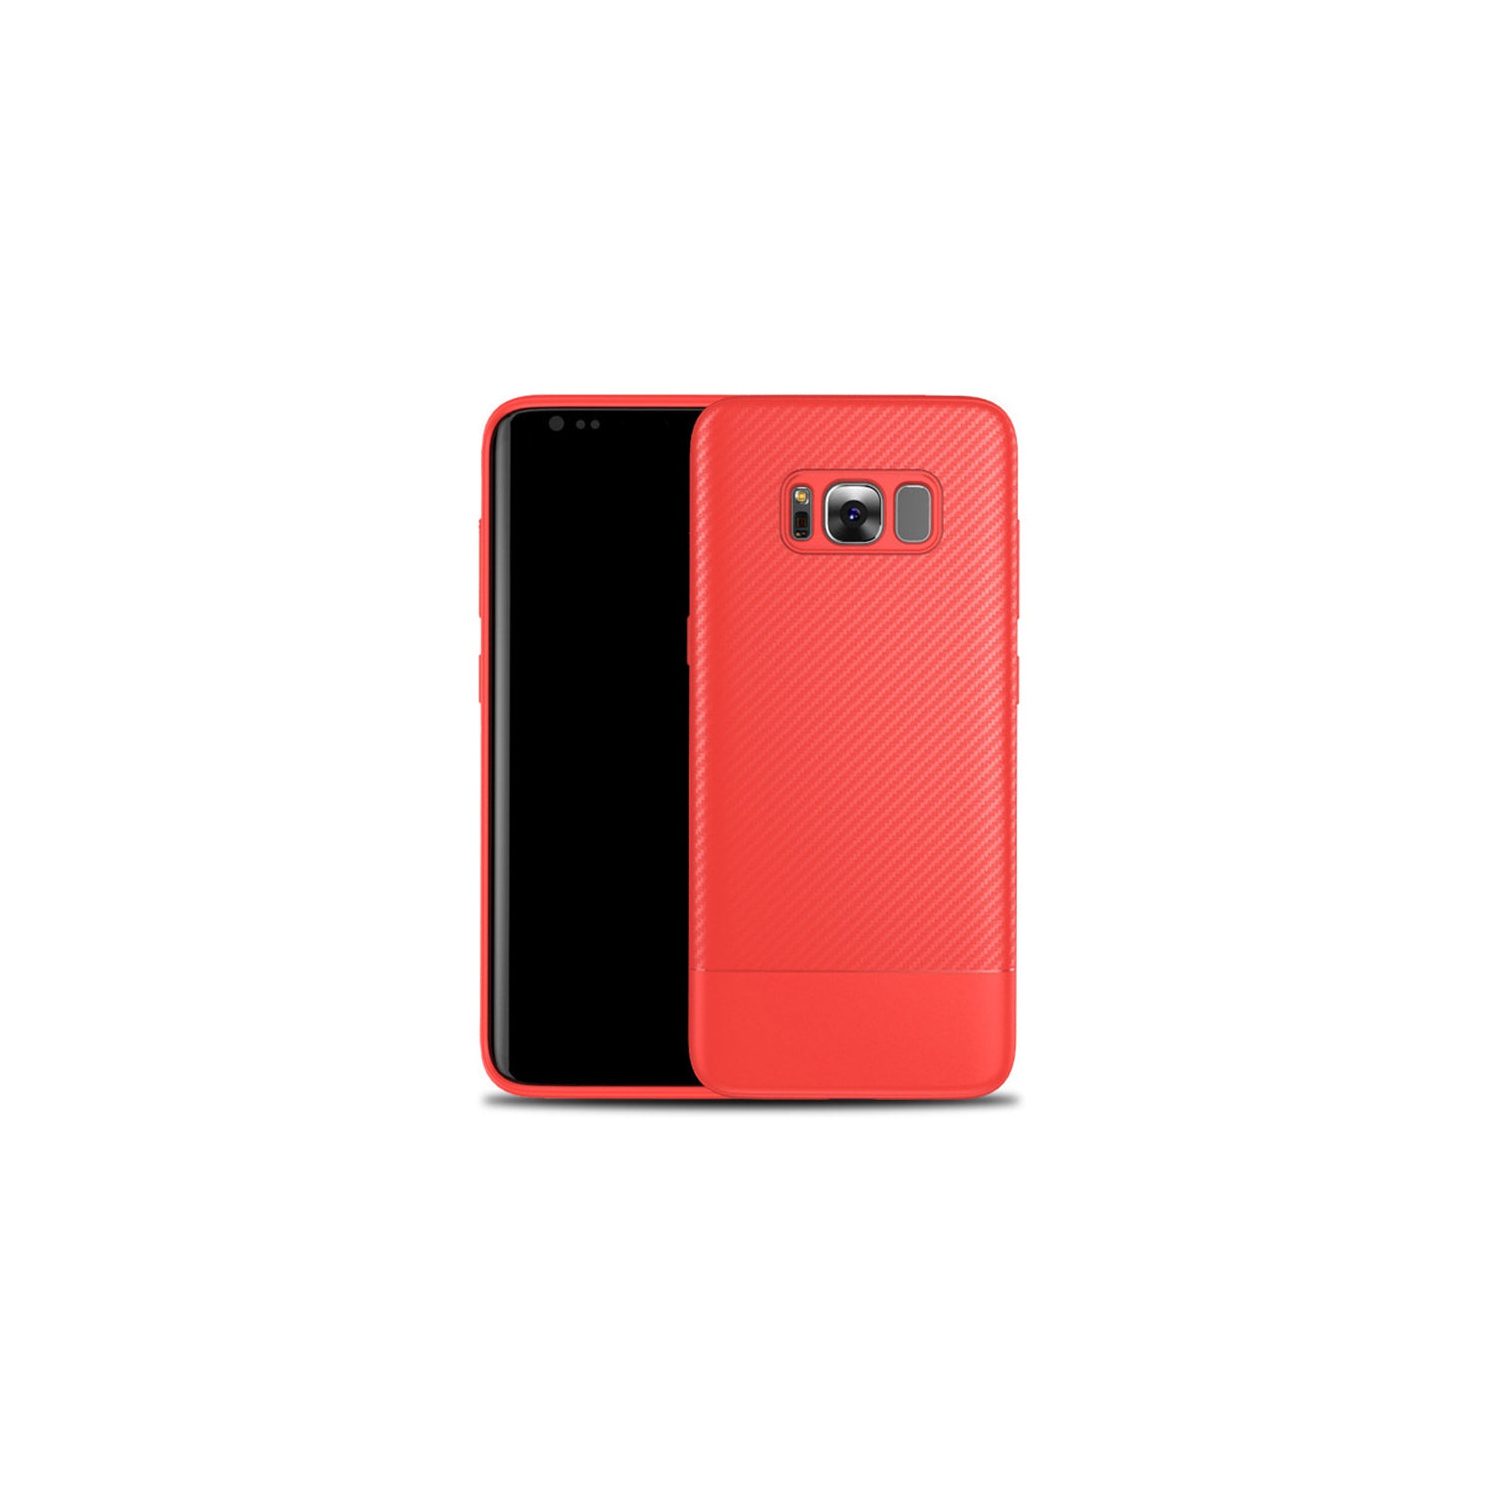 PANDACO Red Carbon Fiber Case for Samsung Galaxy S8